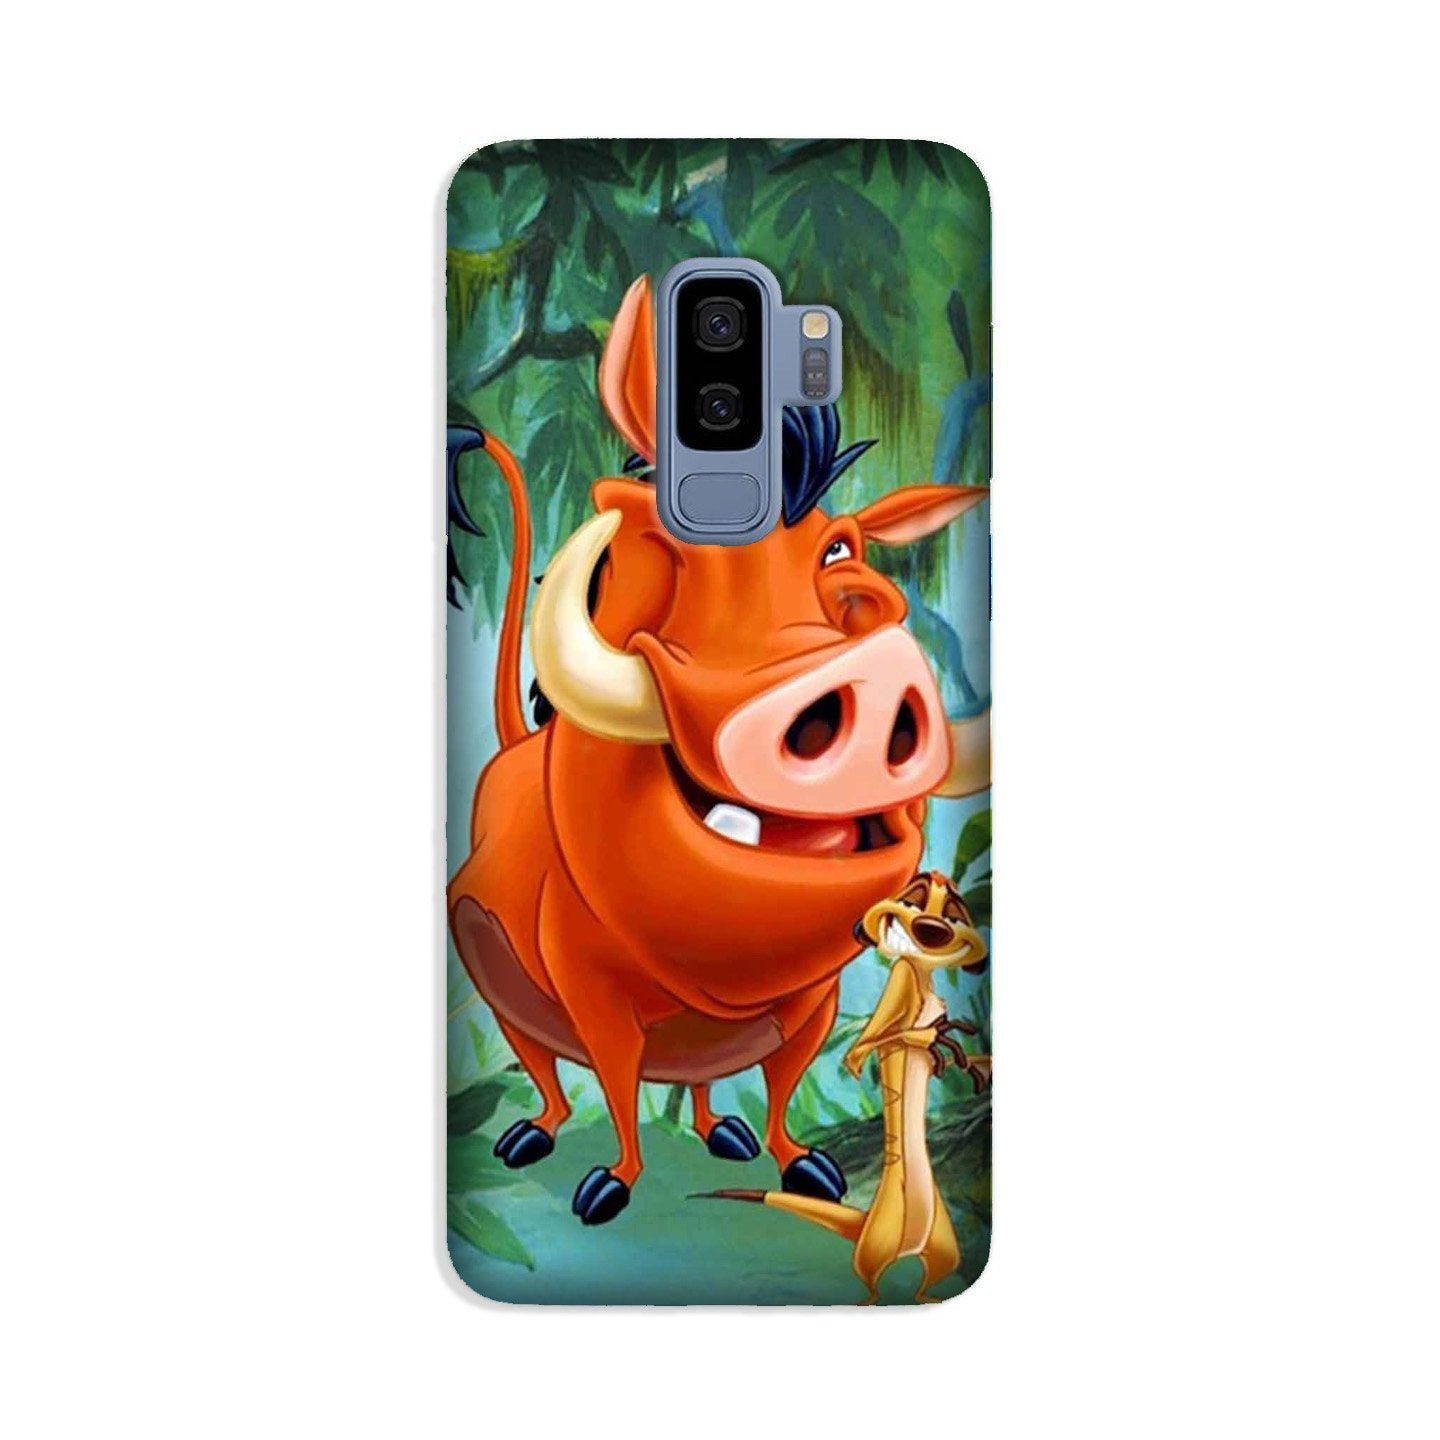 Timon and Pumbaa Mobile Back Case for Galaxy S9 Plus  (Design - 305)